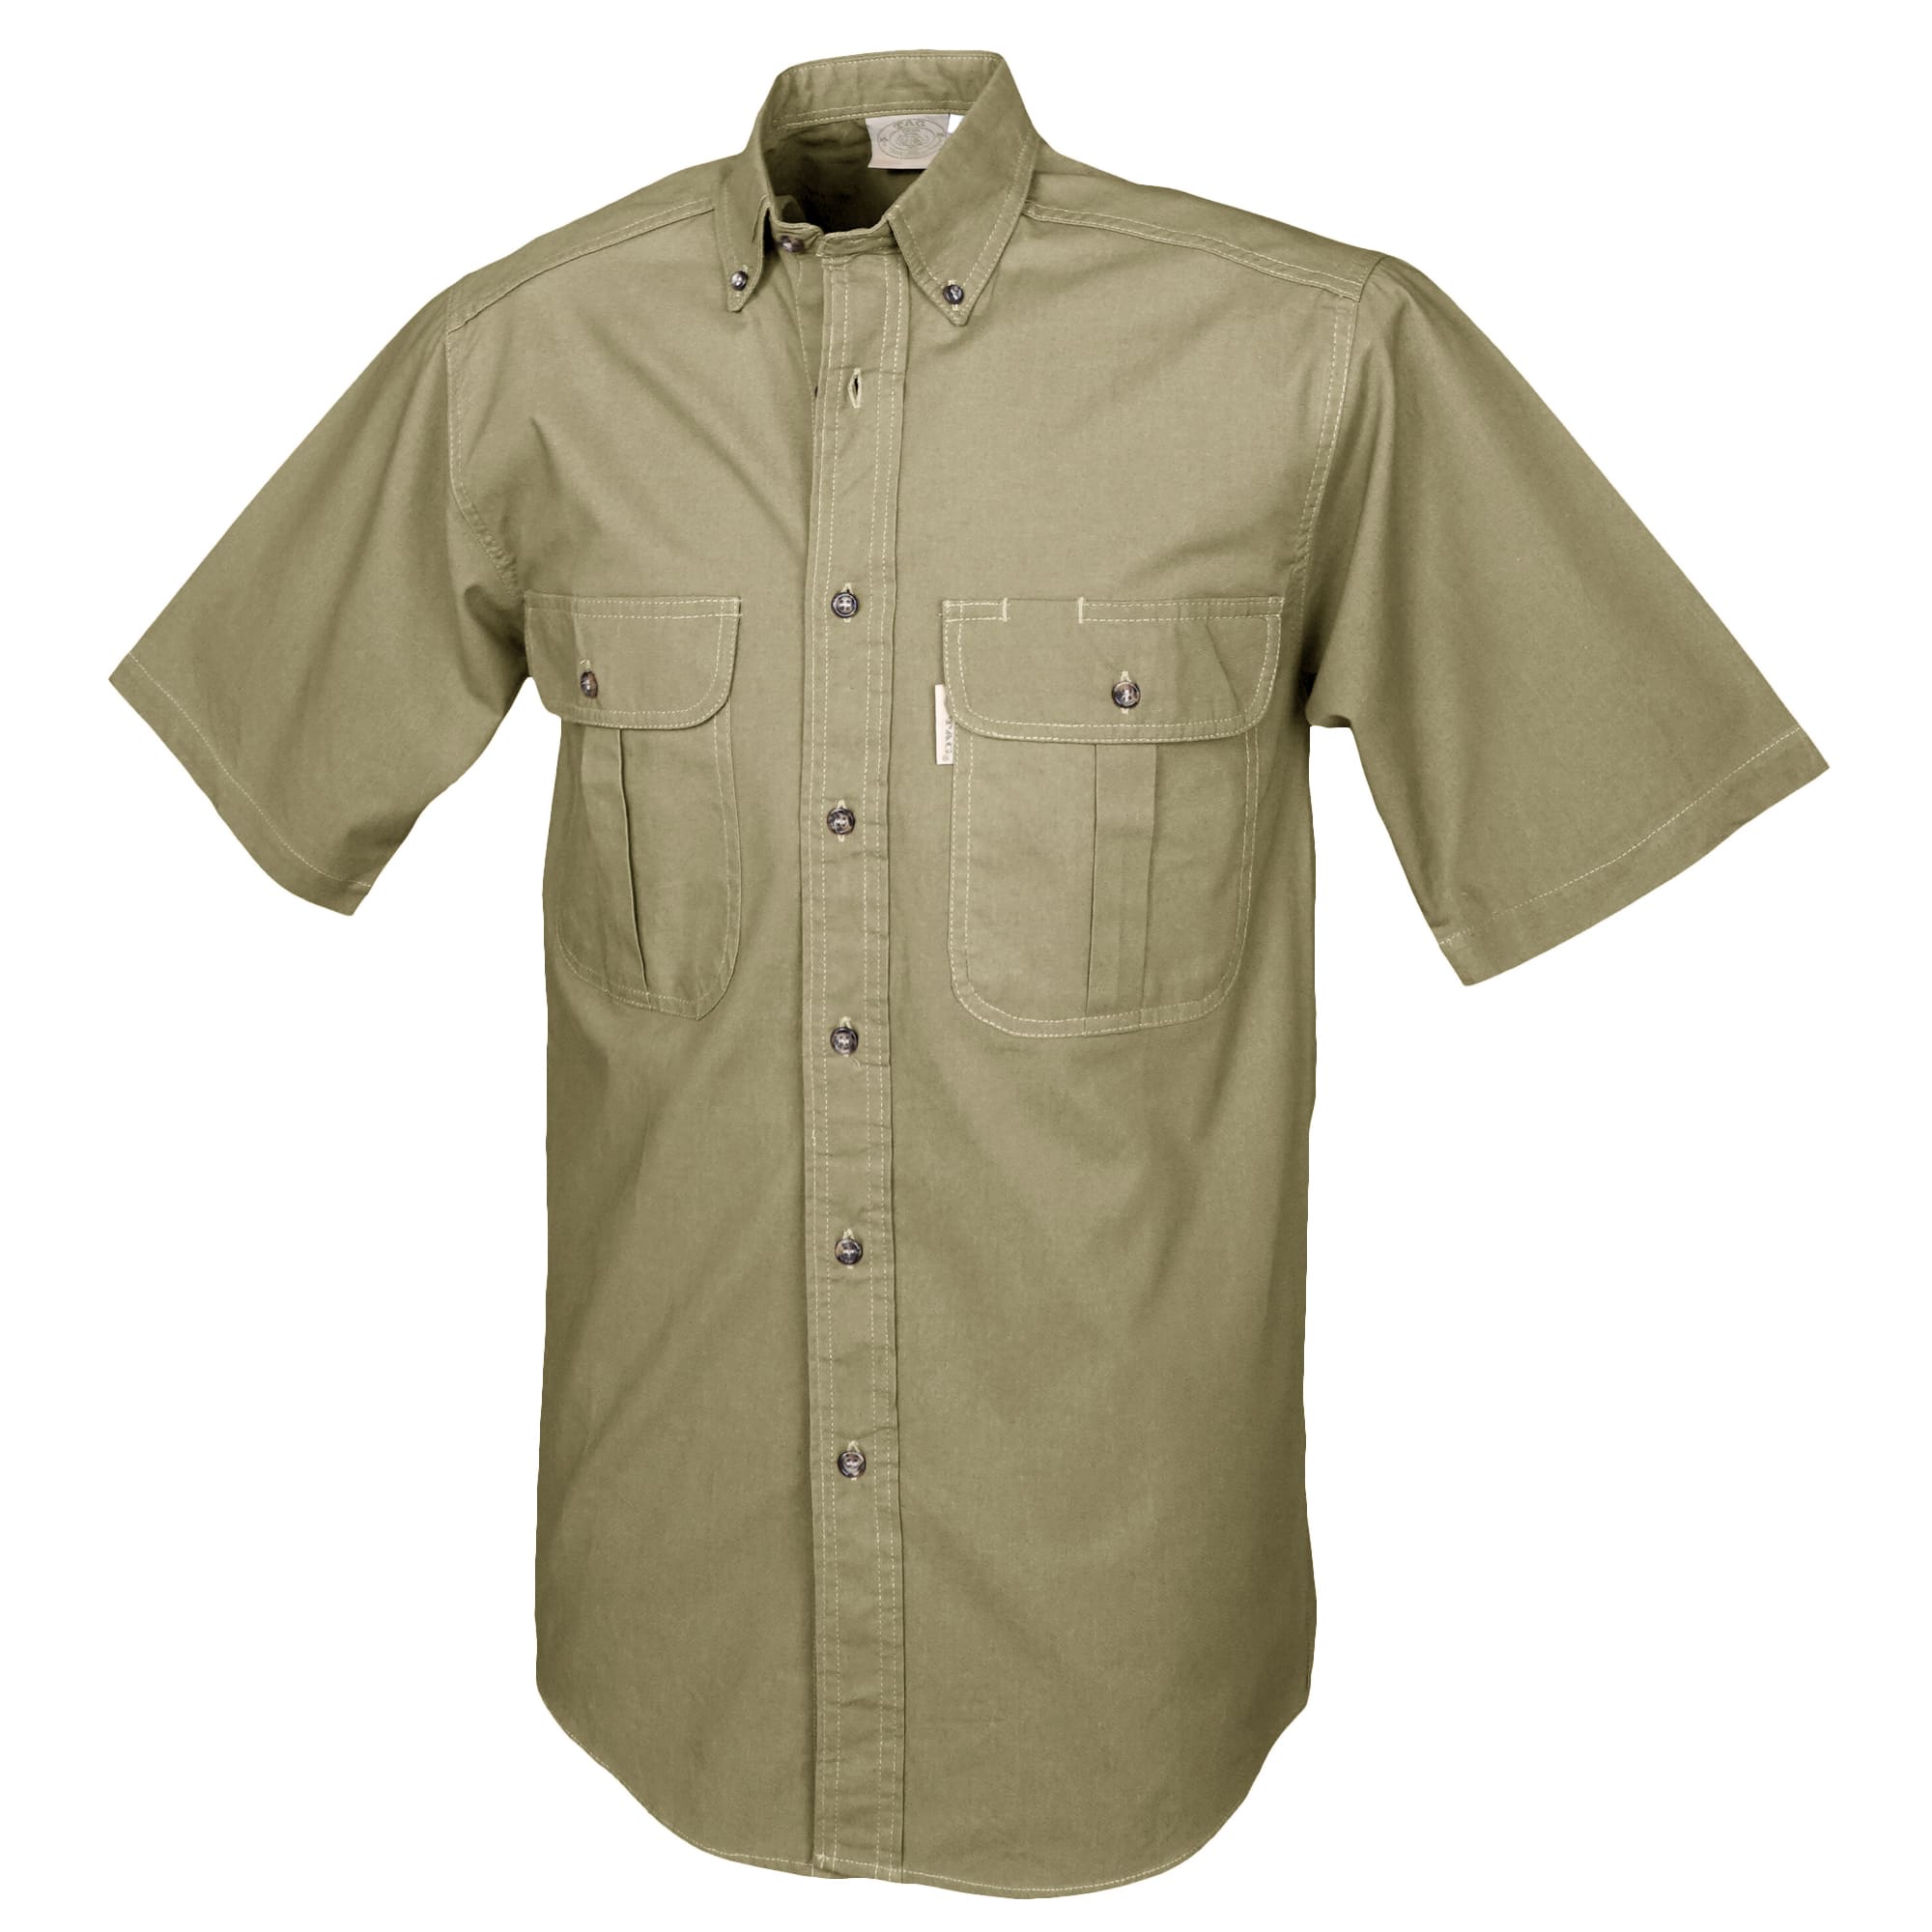 Men's Safari Shirt with Two Button Flap pockets and Button Down Collars  100% Cotton in Short Sleeves by Tag Safari